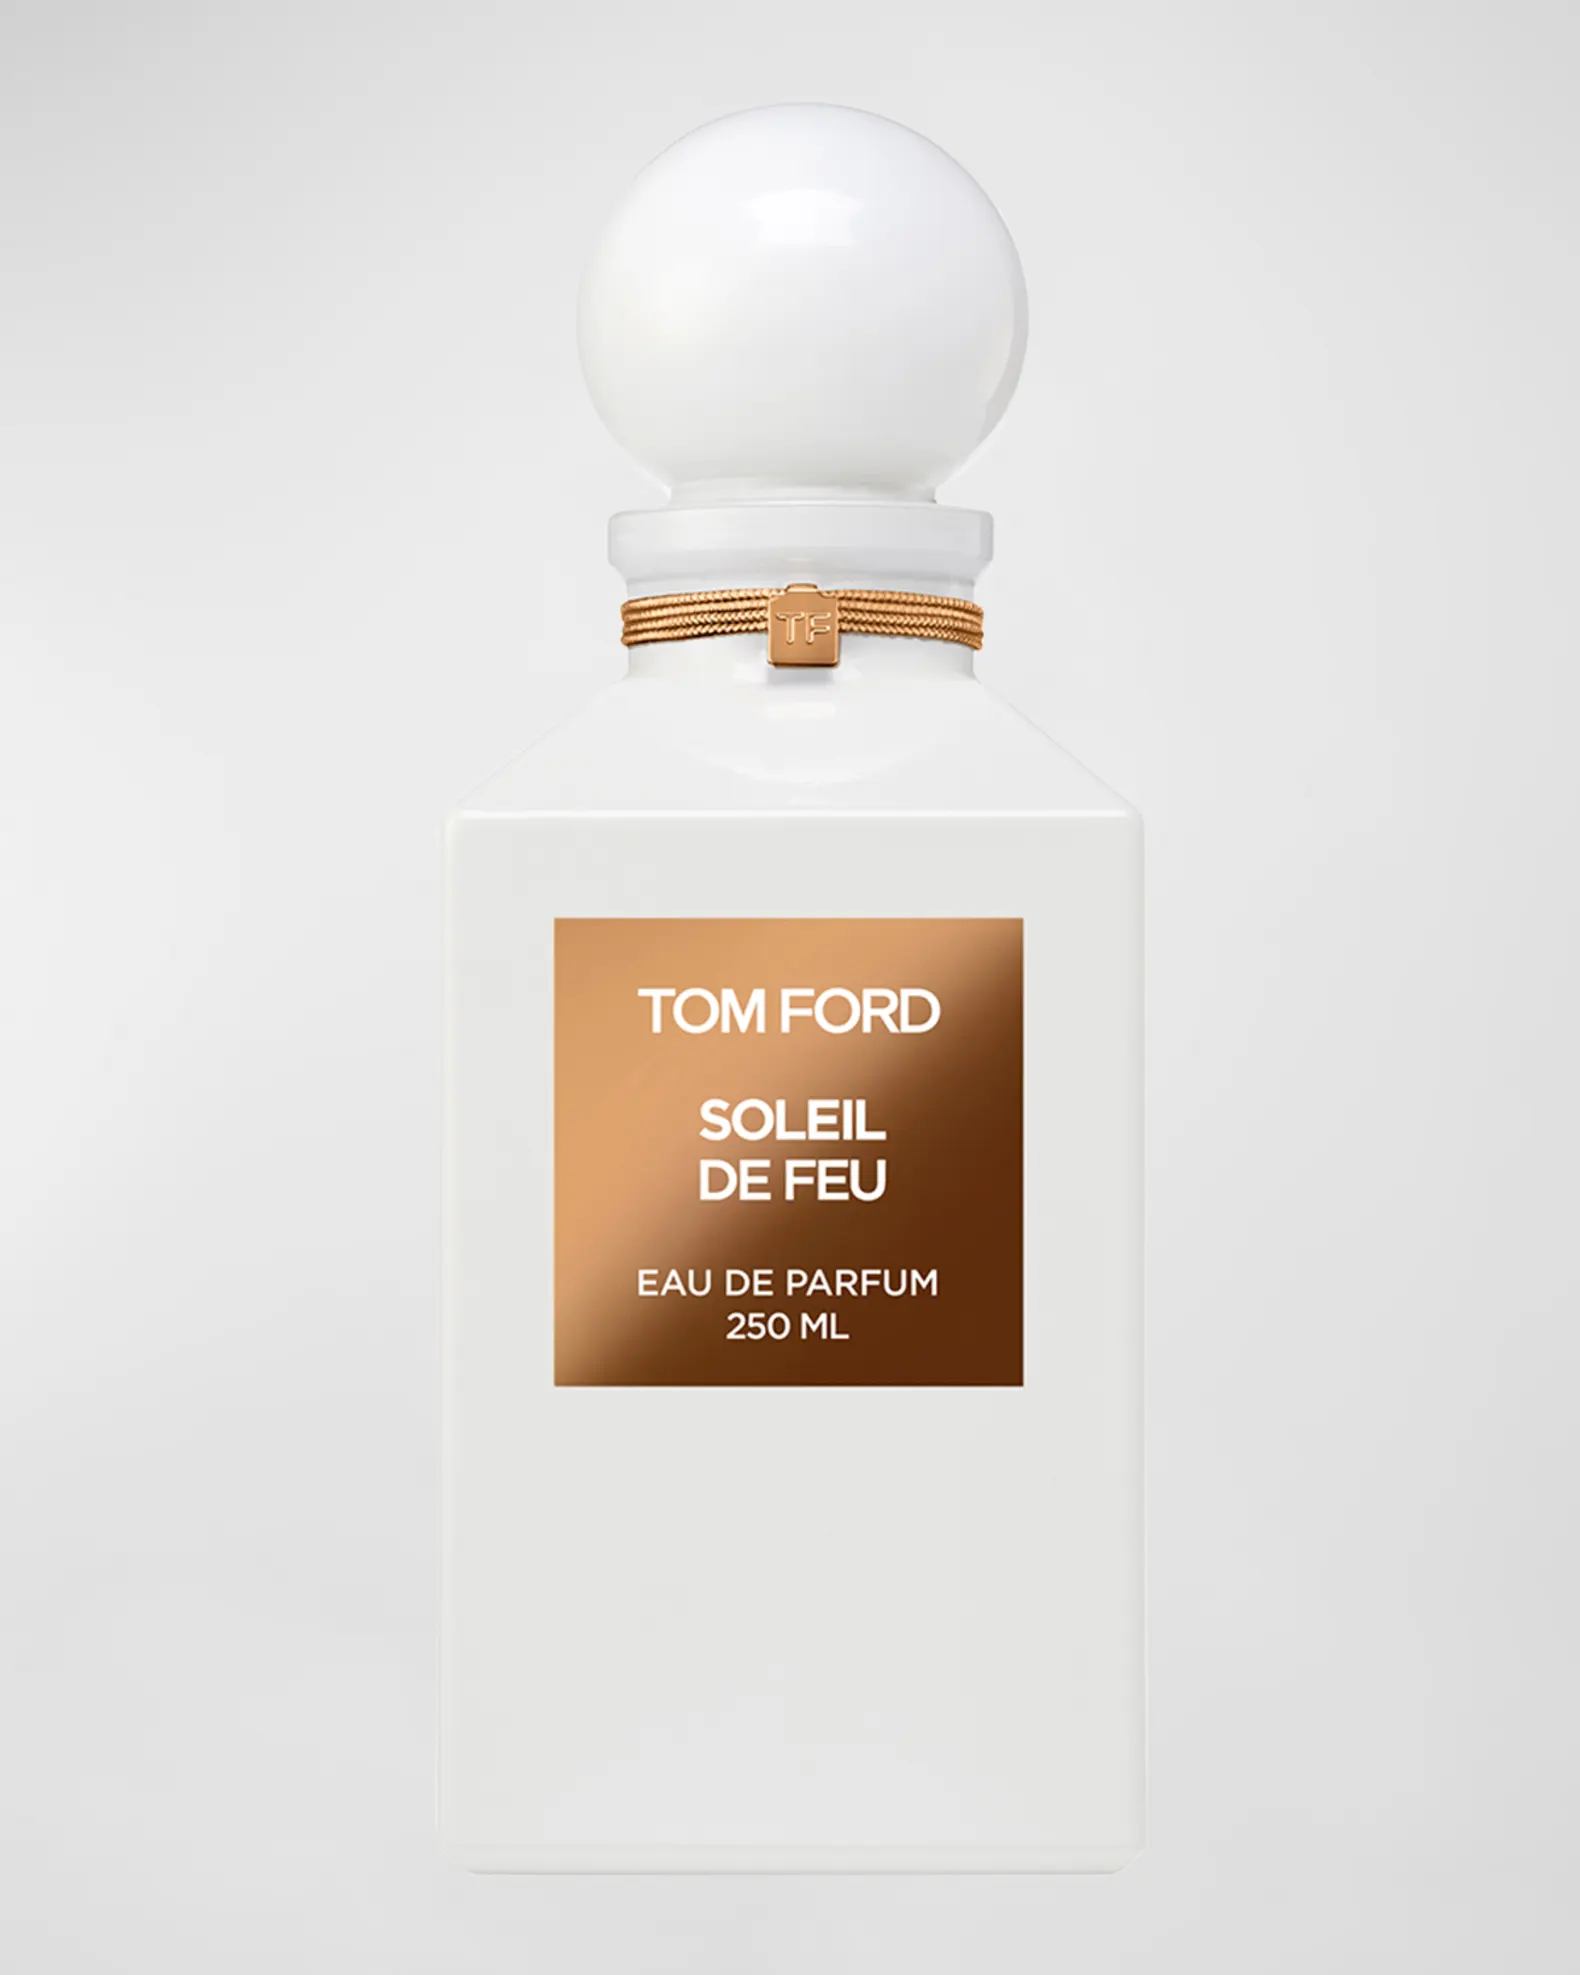  Bestsellers from Tom Ford - neiman marcus